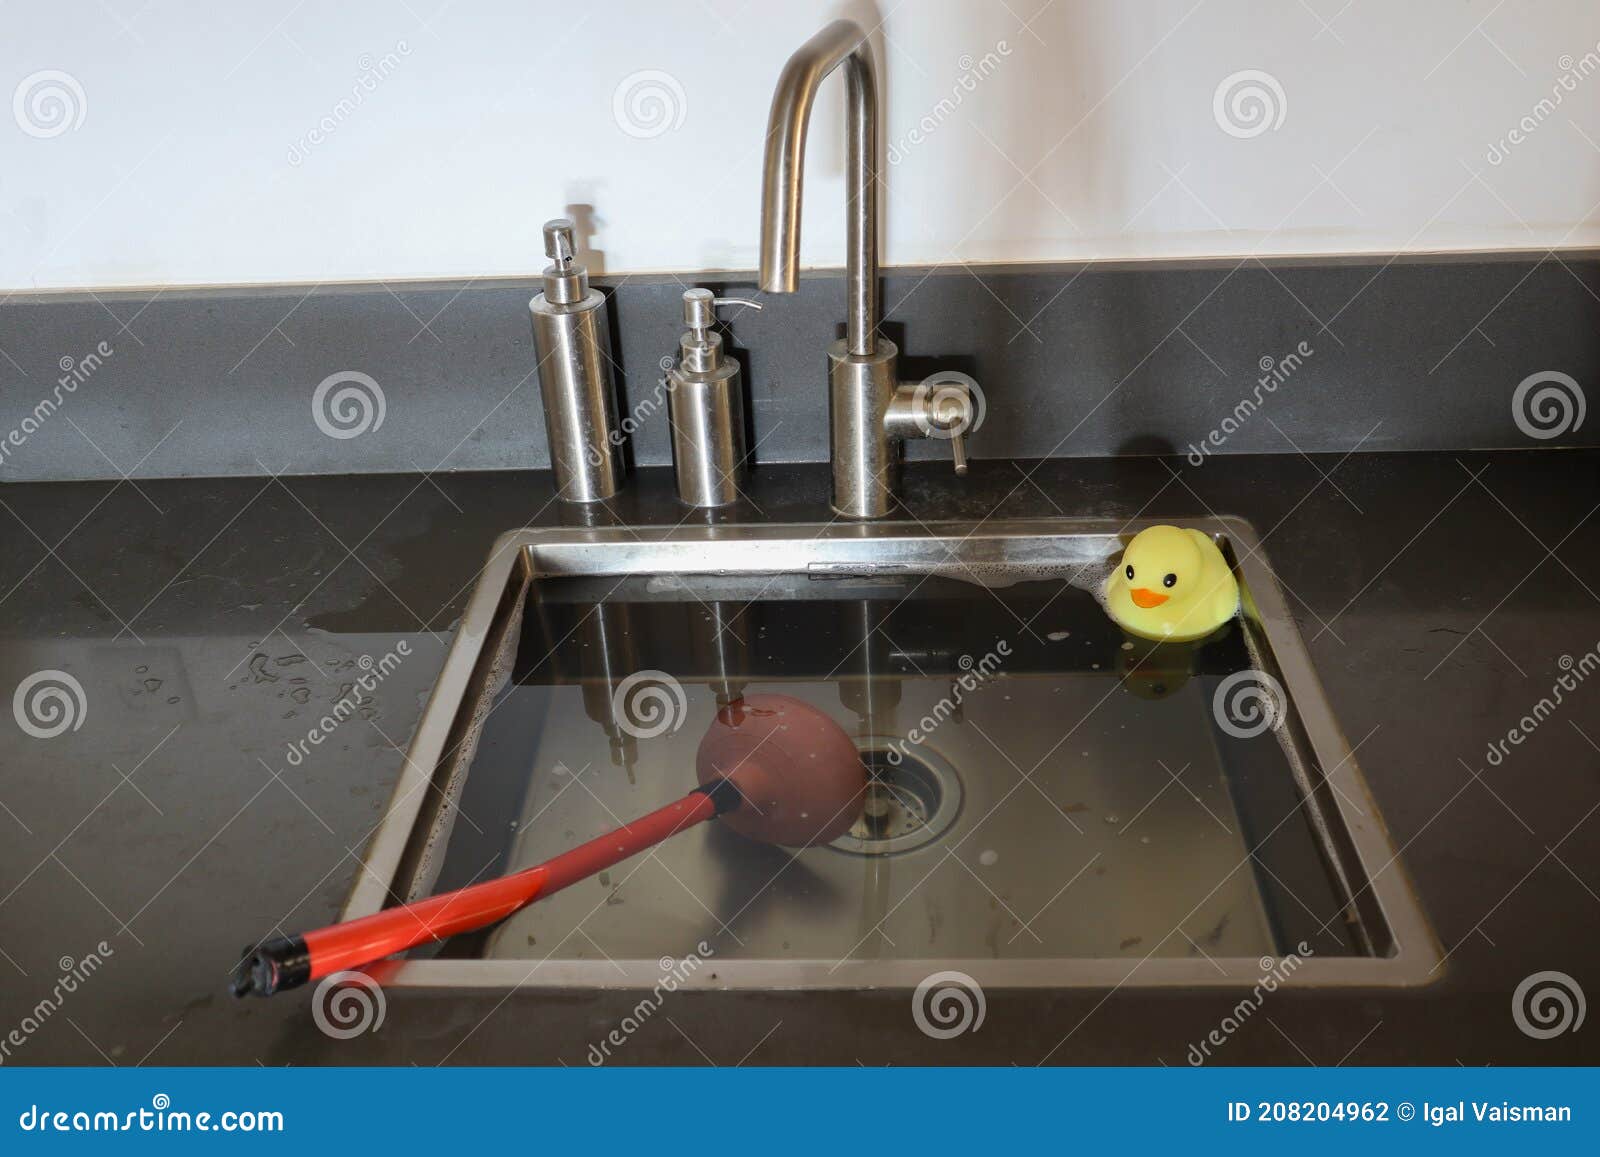 https://thumbs.dreamstime.com/z/overflowing-kitchen-sink-clogged-drain-plunger-force-cup-yellow-rubber-duck-sink-plumbing-problems-overflowing-kitchen-208204962.jpg